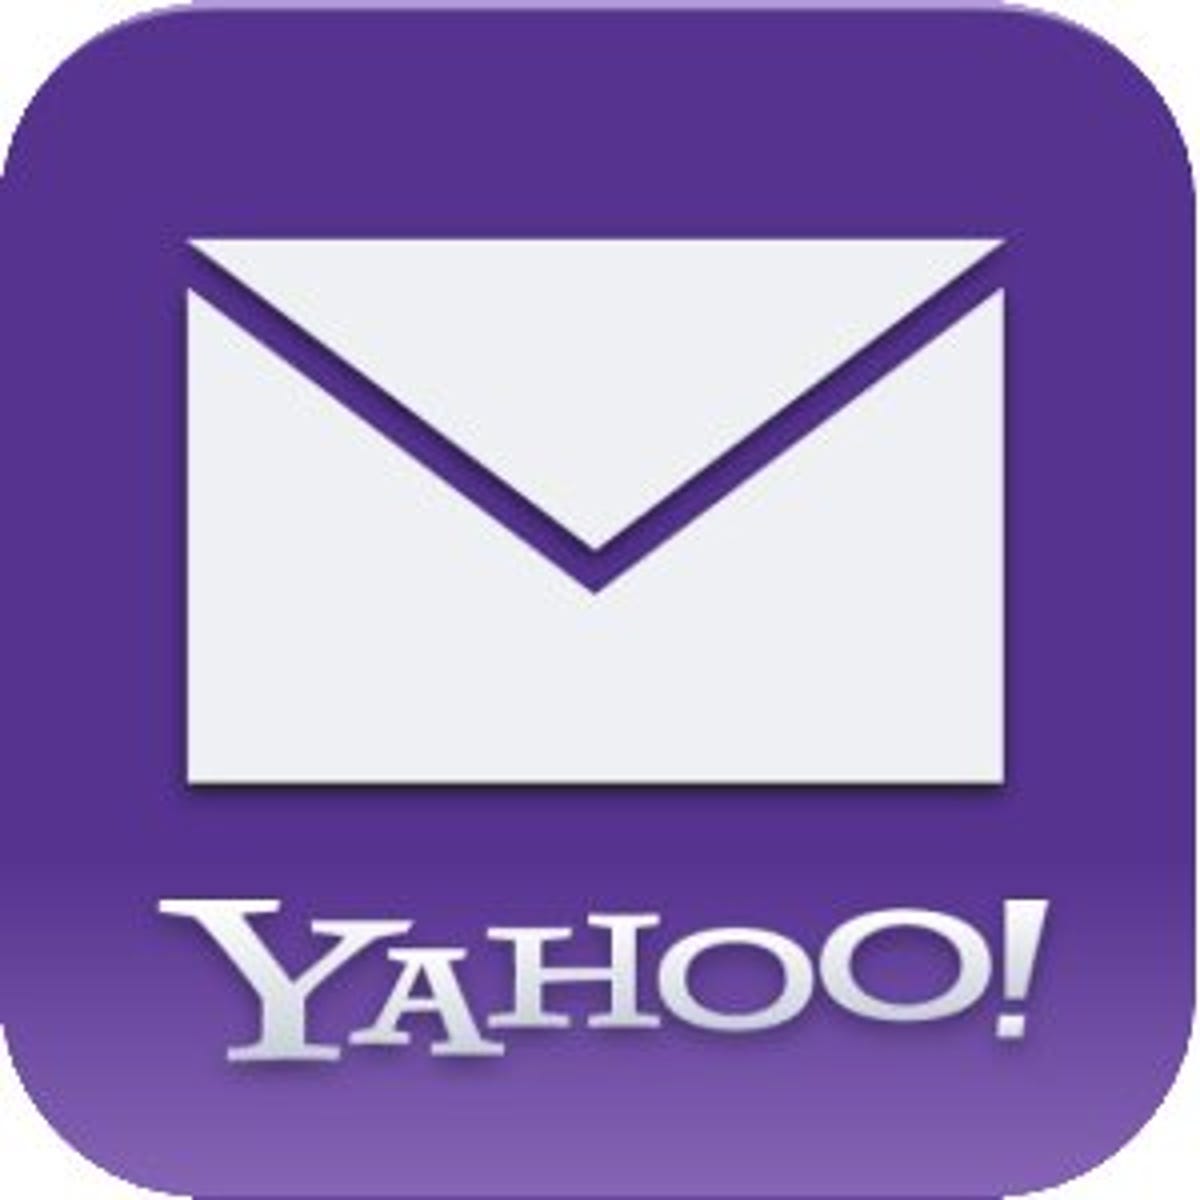 Yahoo forced to acknowledge Yahoo Mail problems in worst failure